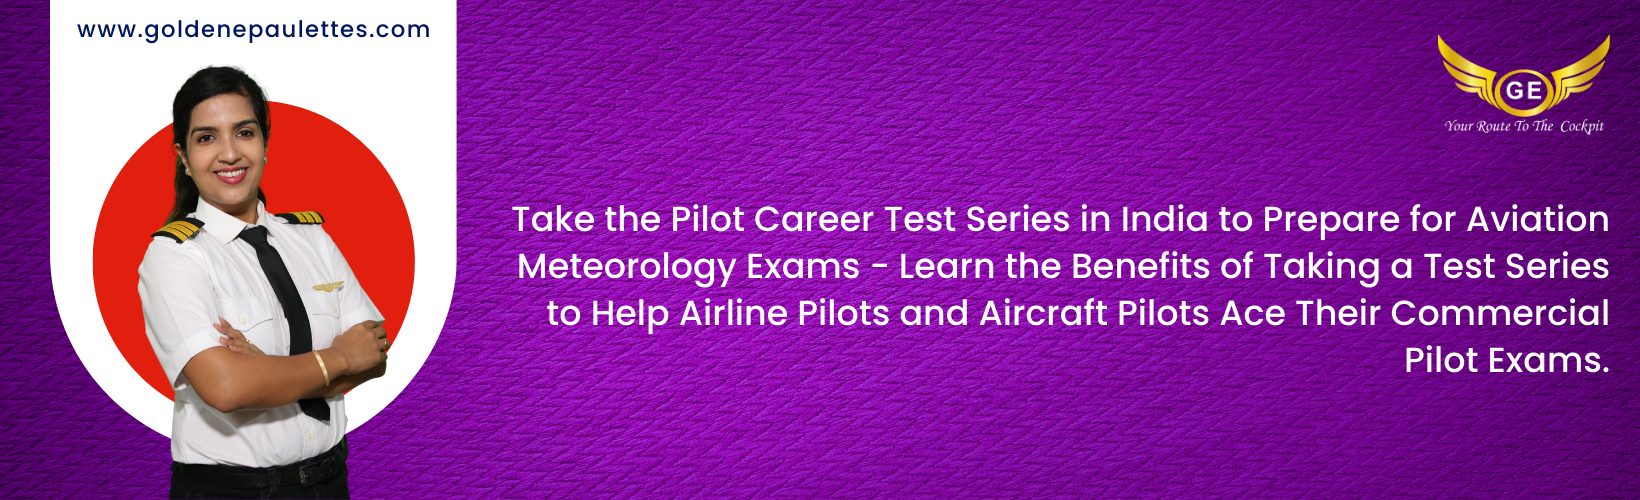 Airline Pilots and Aviation Meteorology Course